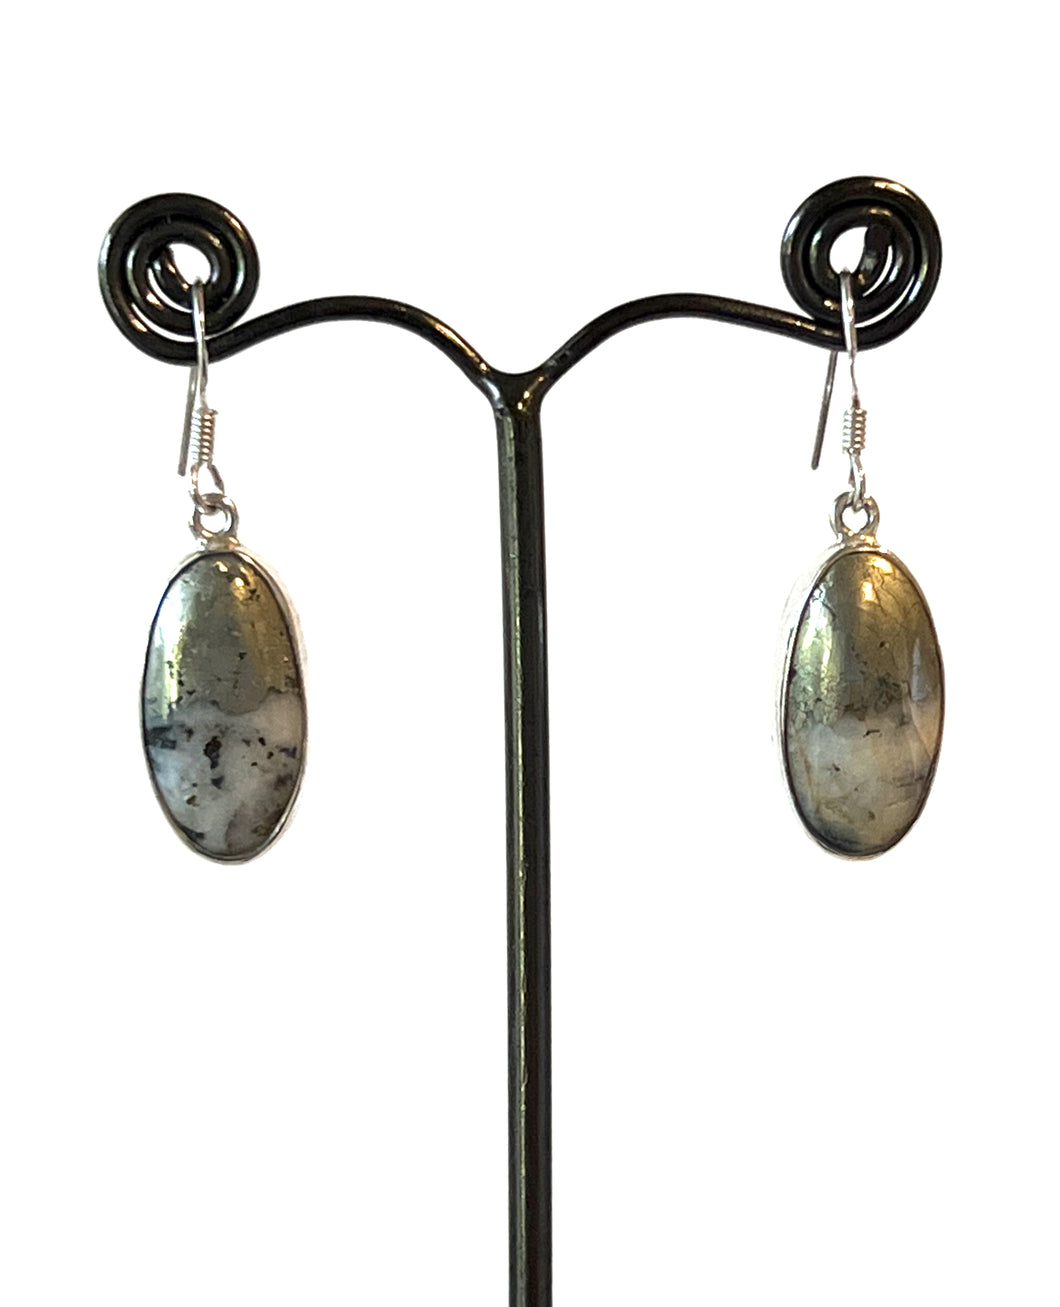 Brown Earrings with Pyrite in Quartz Set in Sterling Silver